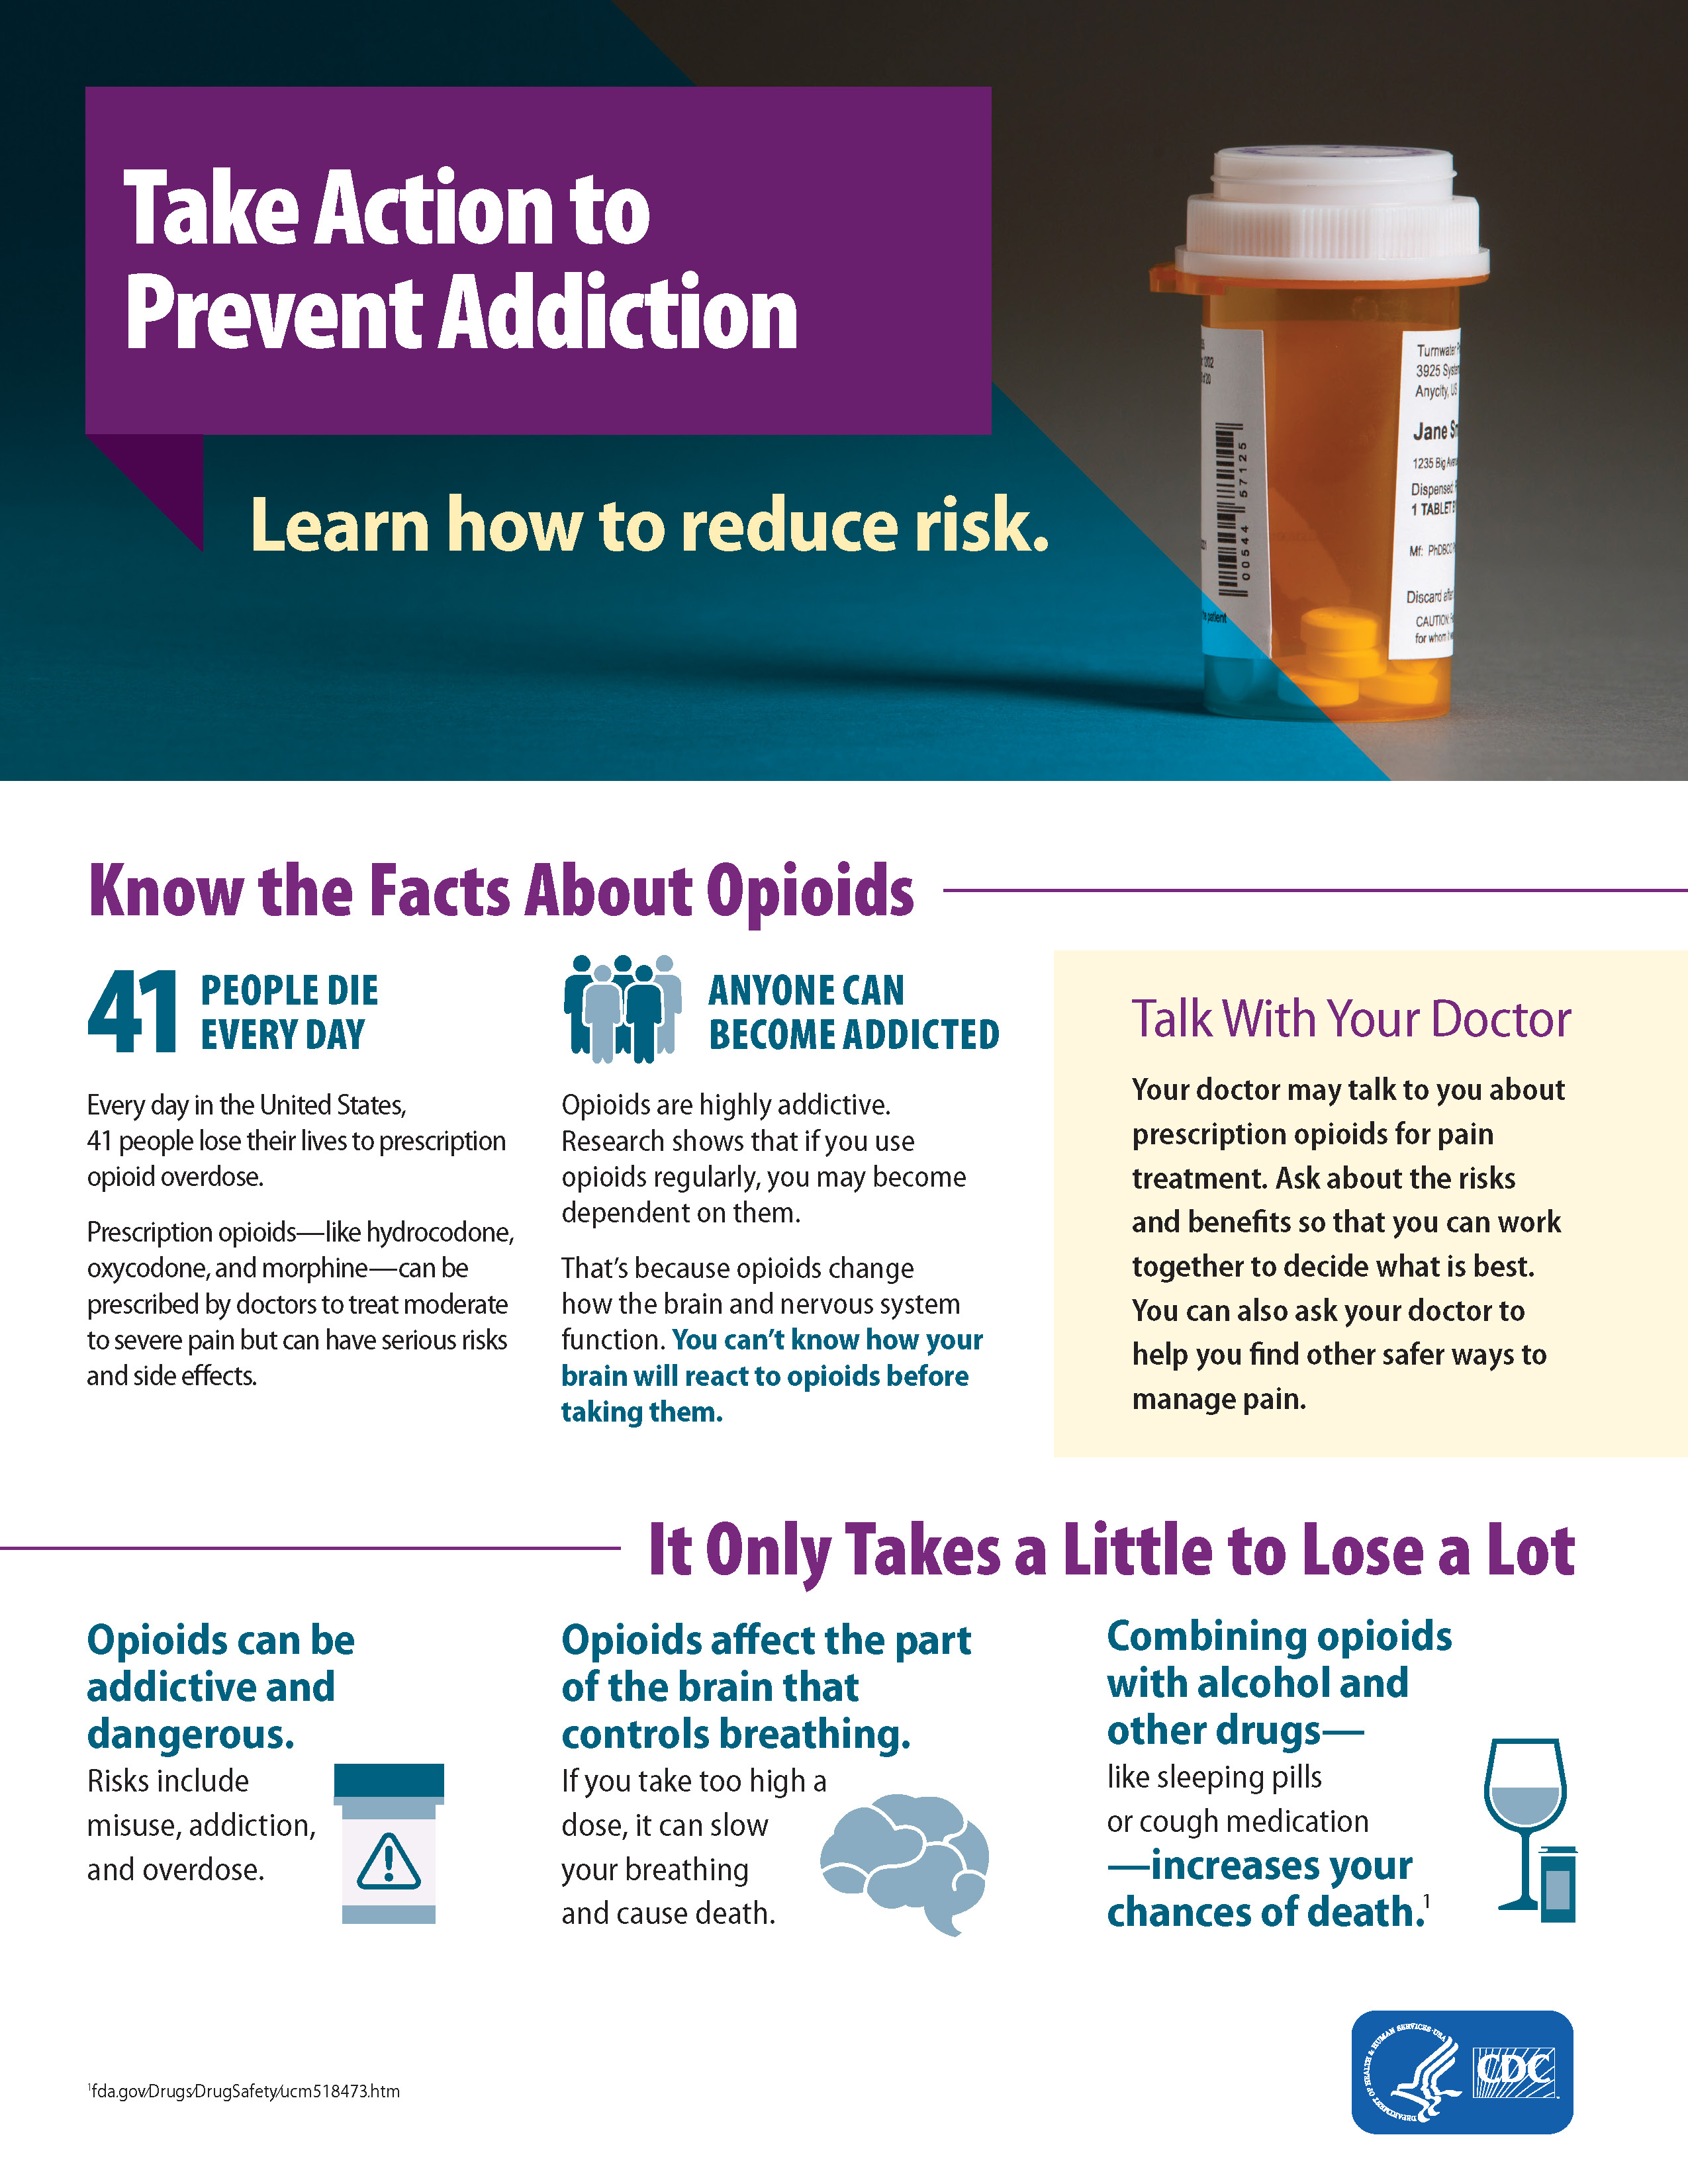 Take Action to Prevent Addiction (Fact Sheet)